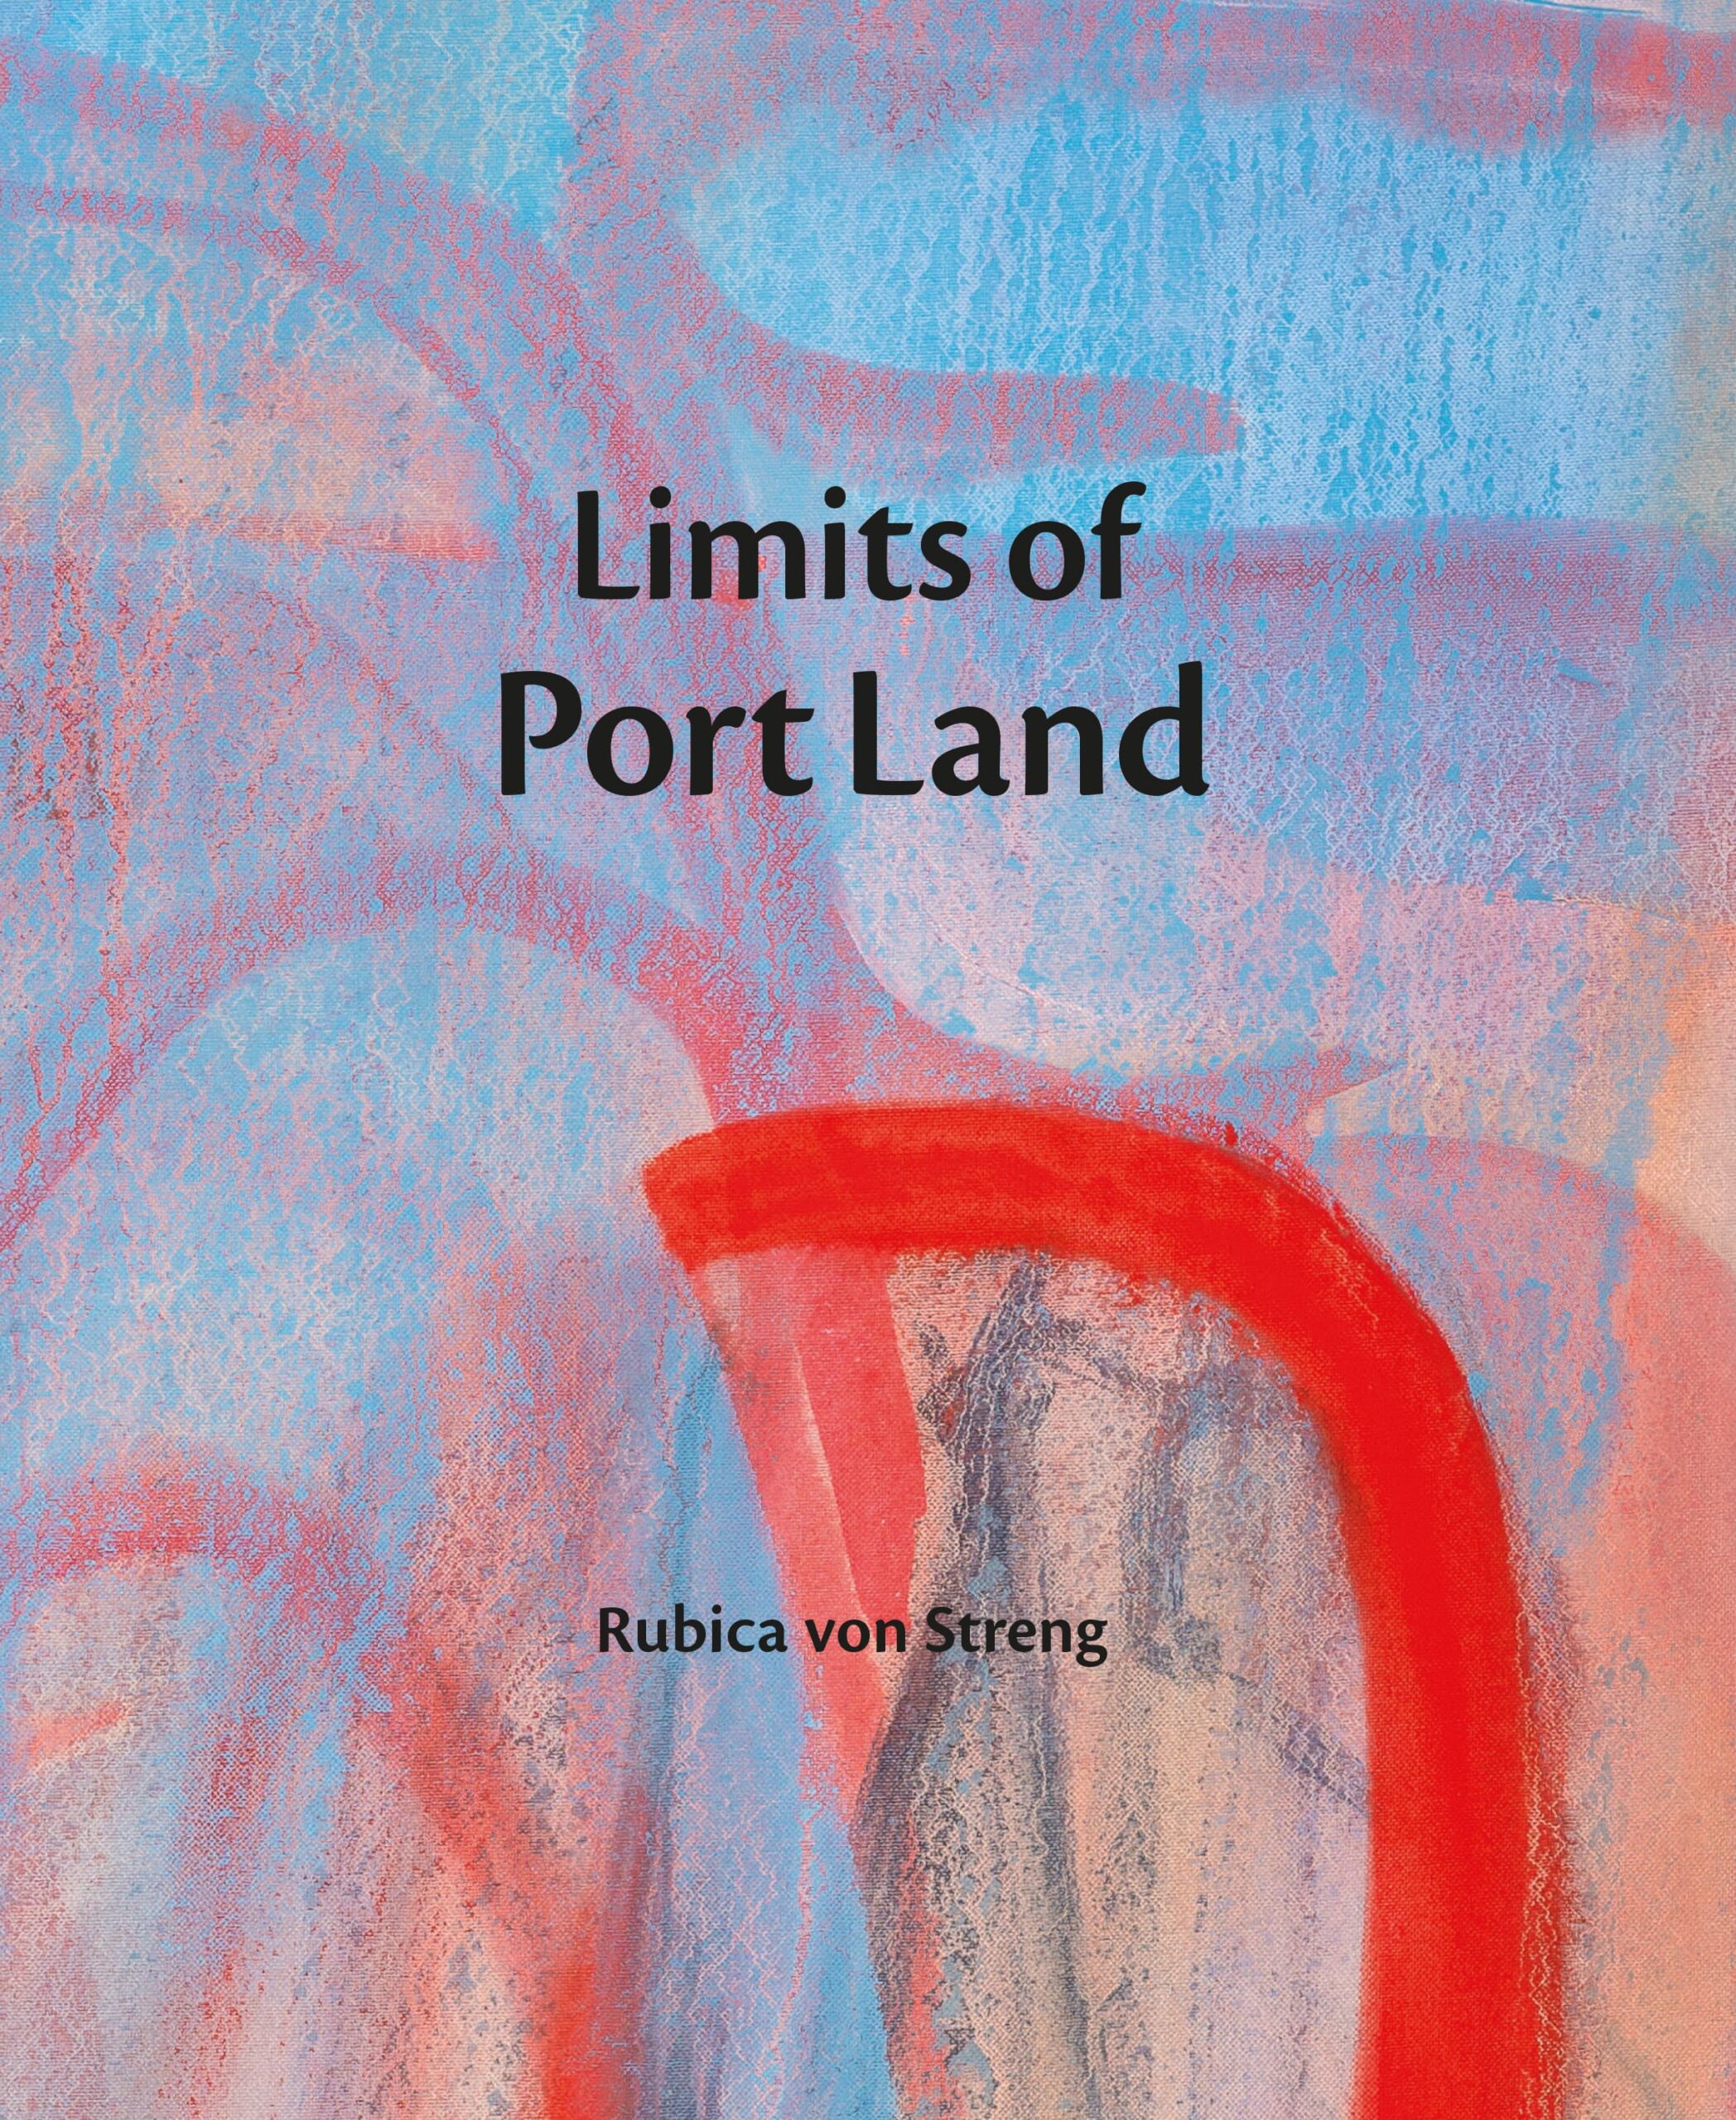 Rubica von Streng: „Limits of PortLand“, Buch Cover